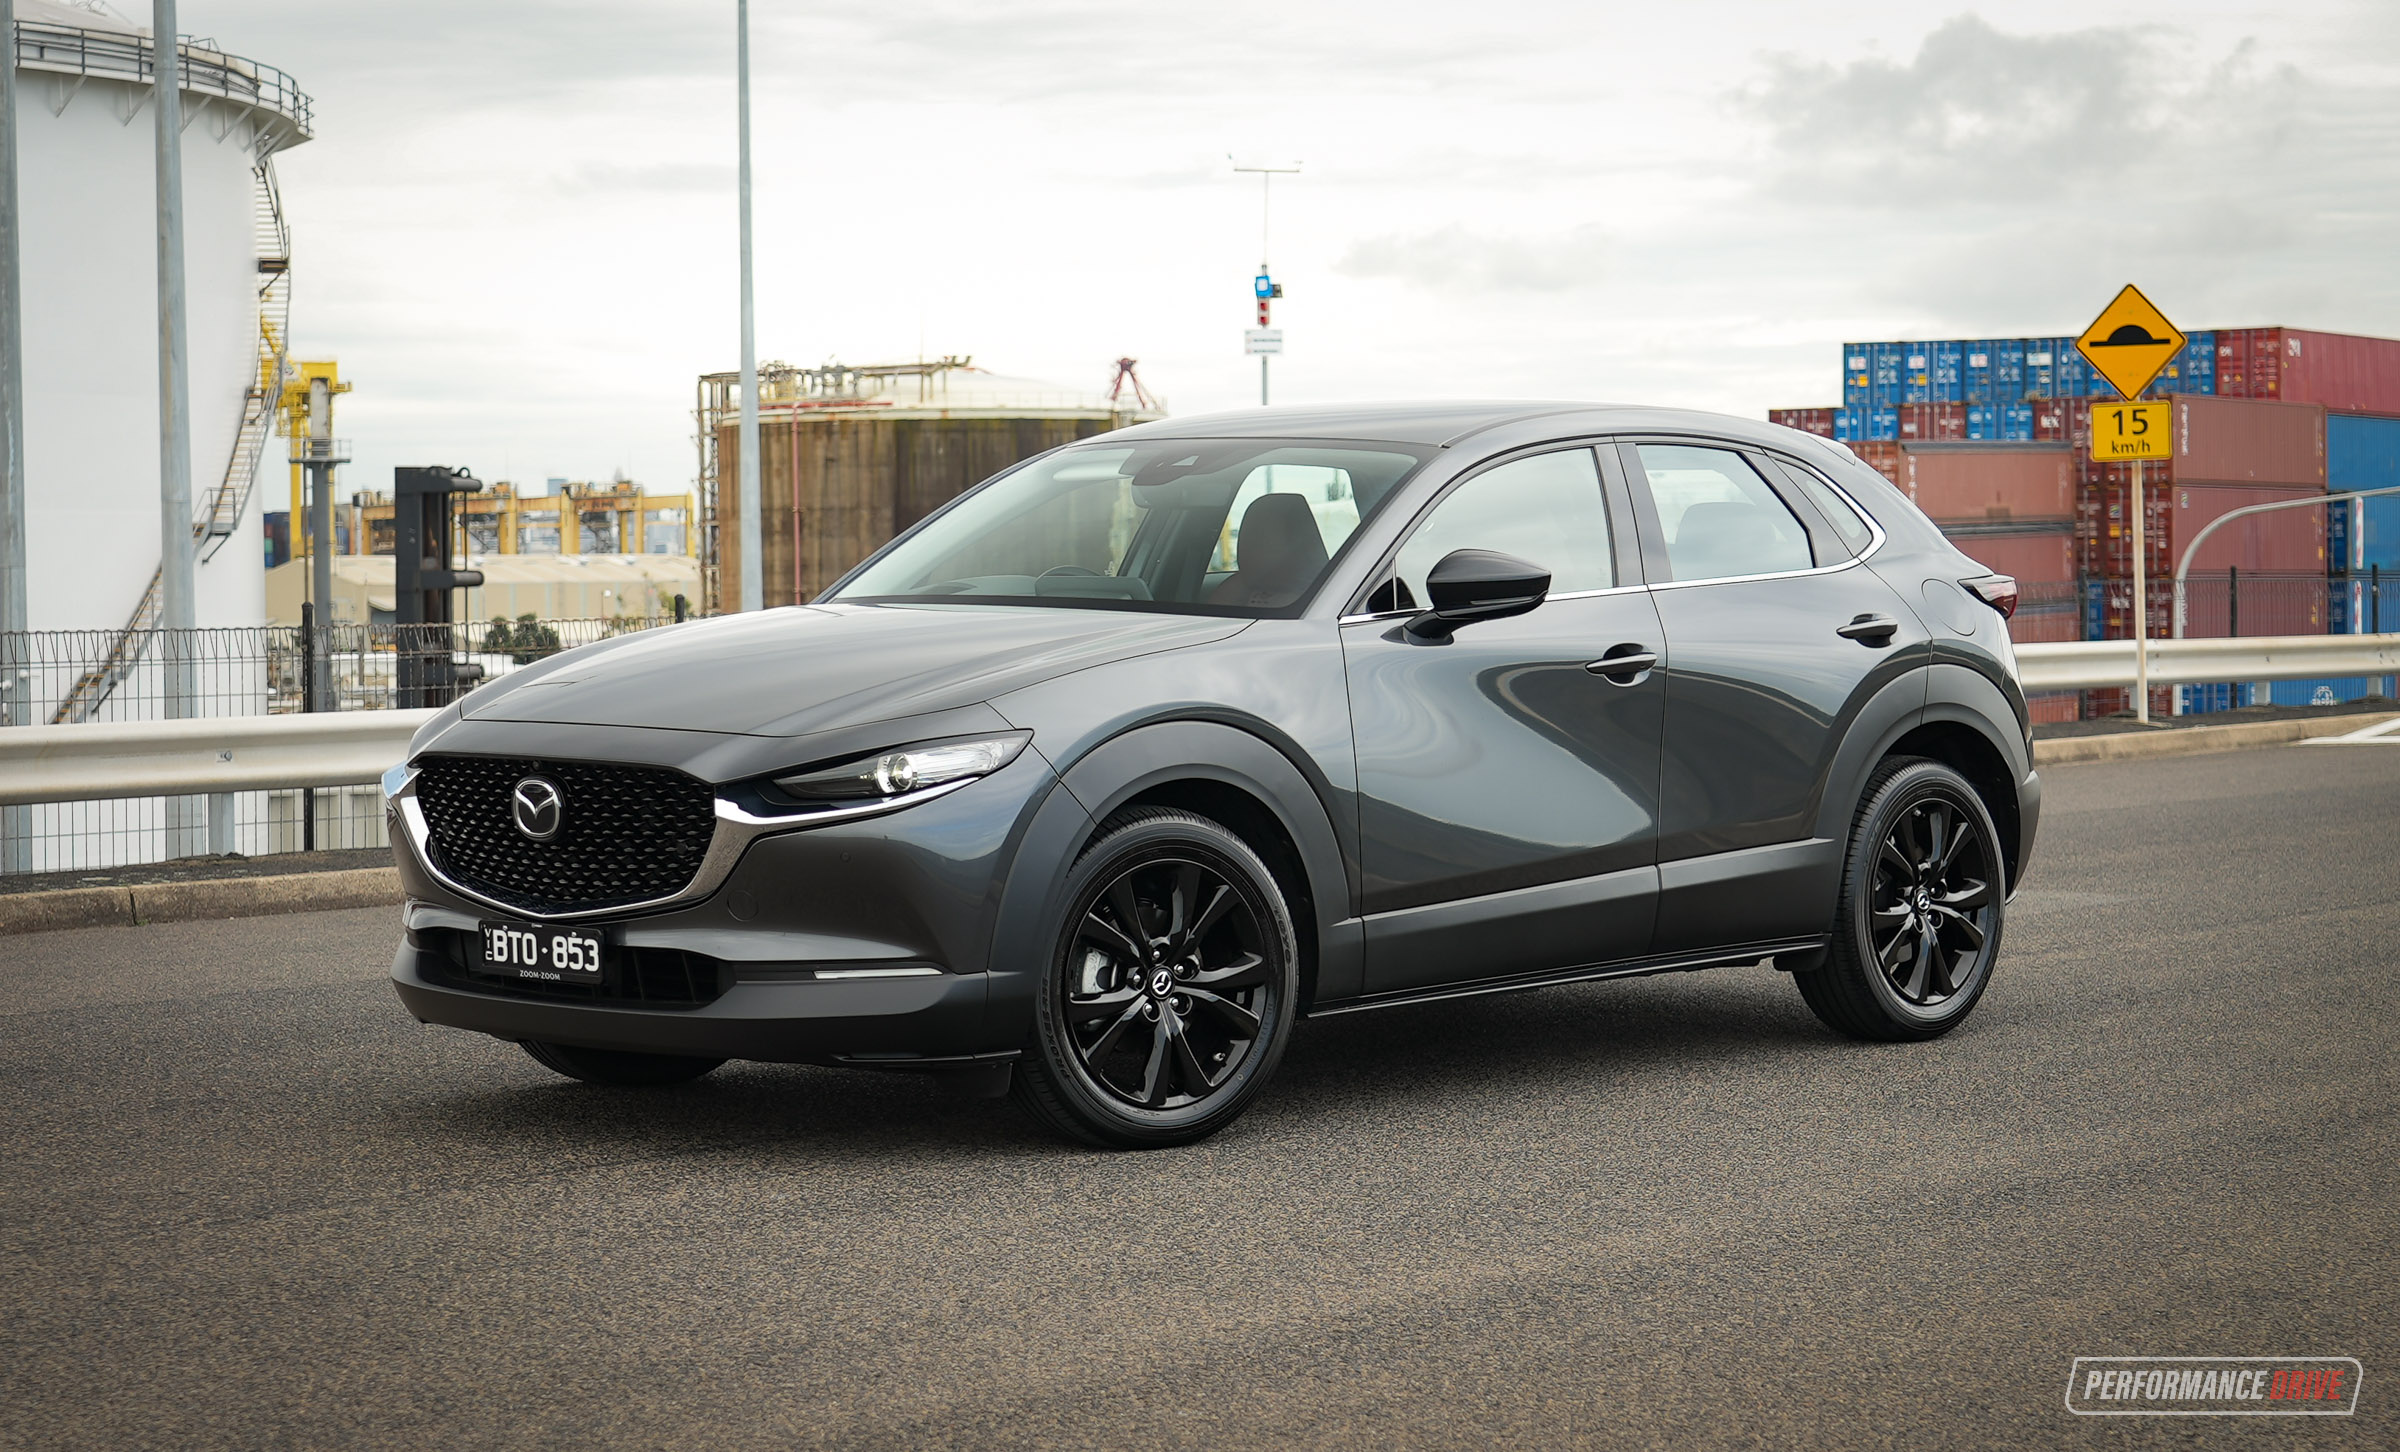 2022 Mazda CX-30 G25 Touring SP review